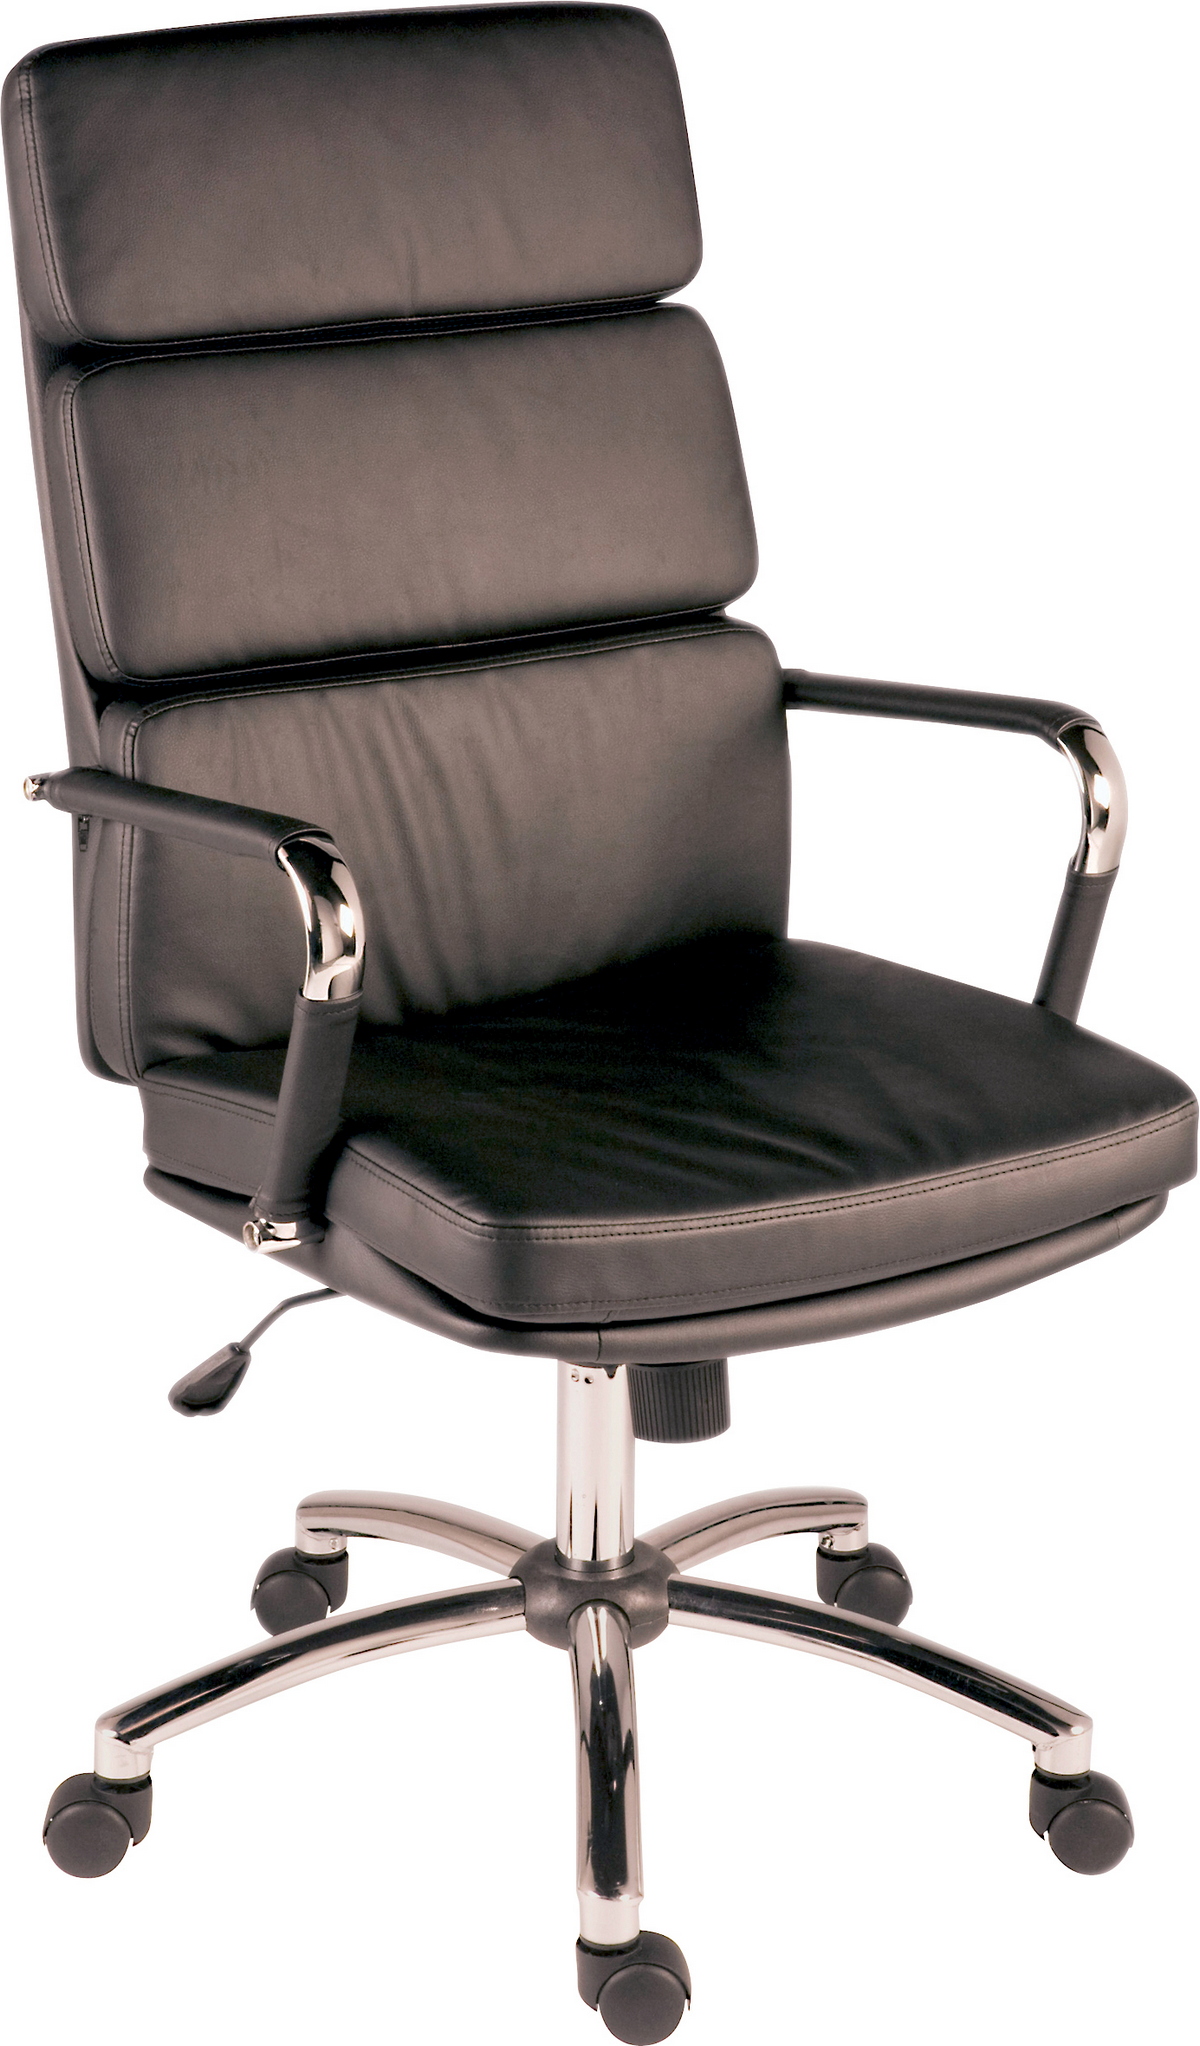 Budget Designer Epsom padded faux leather office executive swivel  chair white